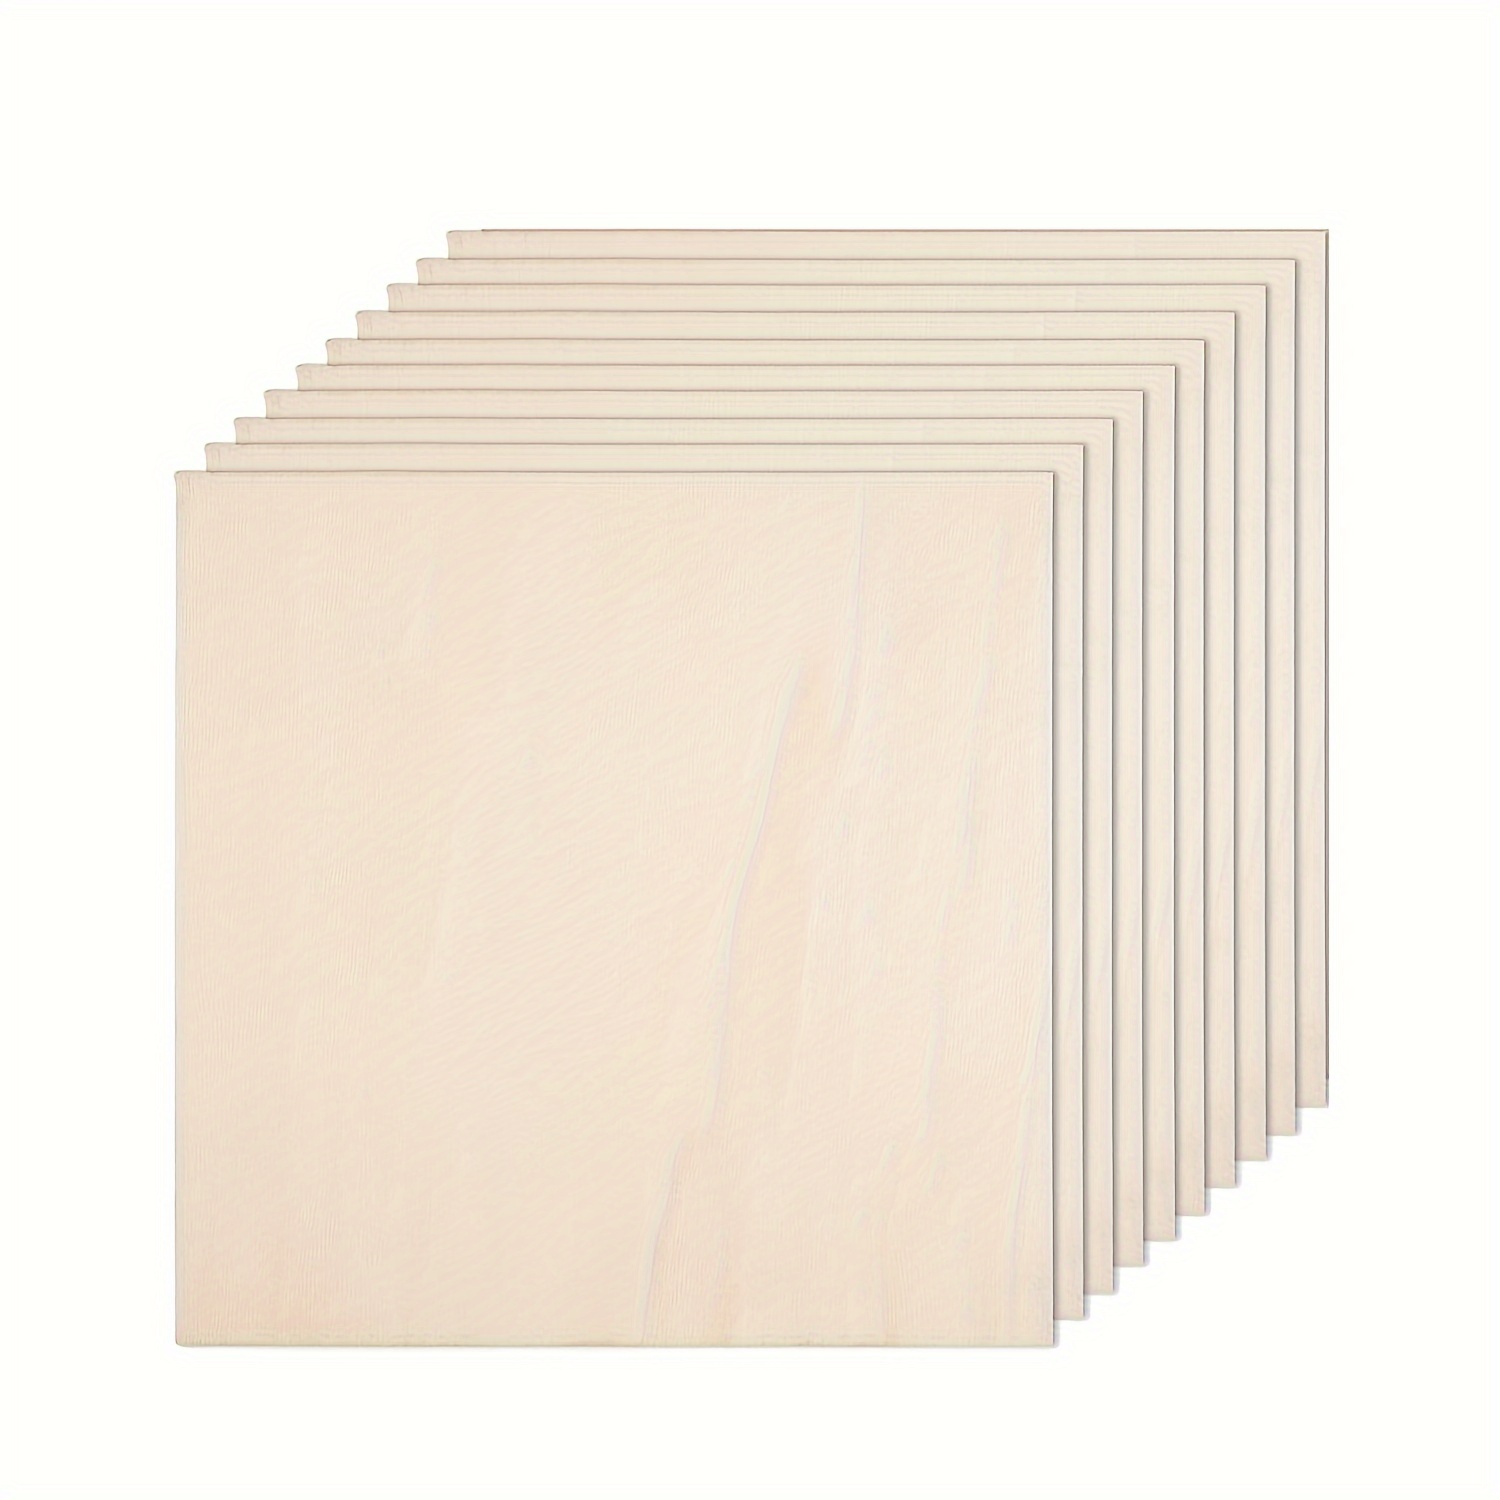 Square Sheets up to 12 Clear 1/8” Thick .118 or 3MM DIY Crafts